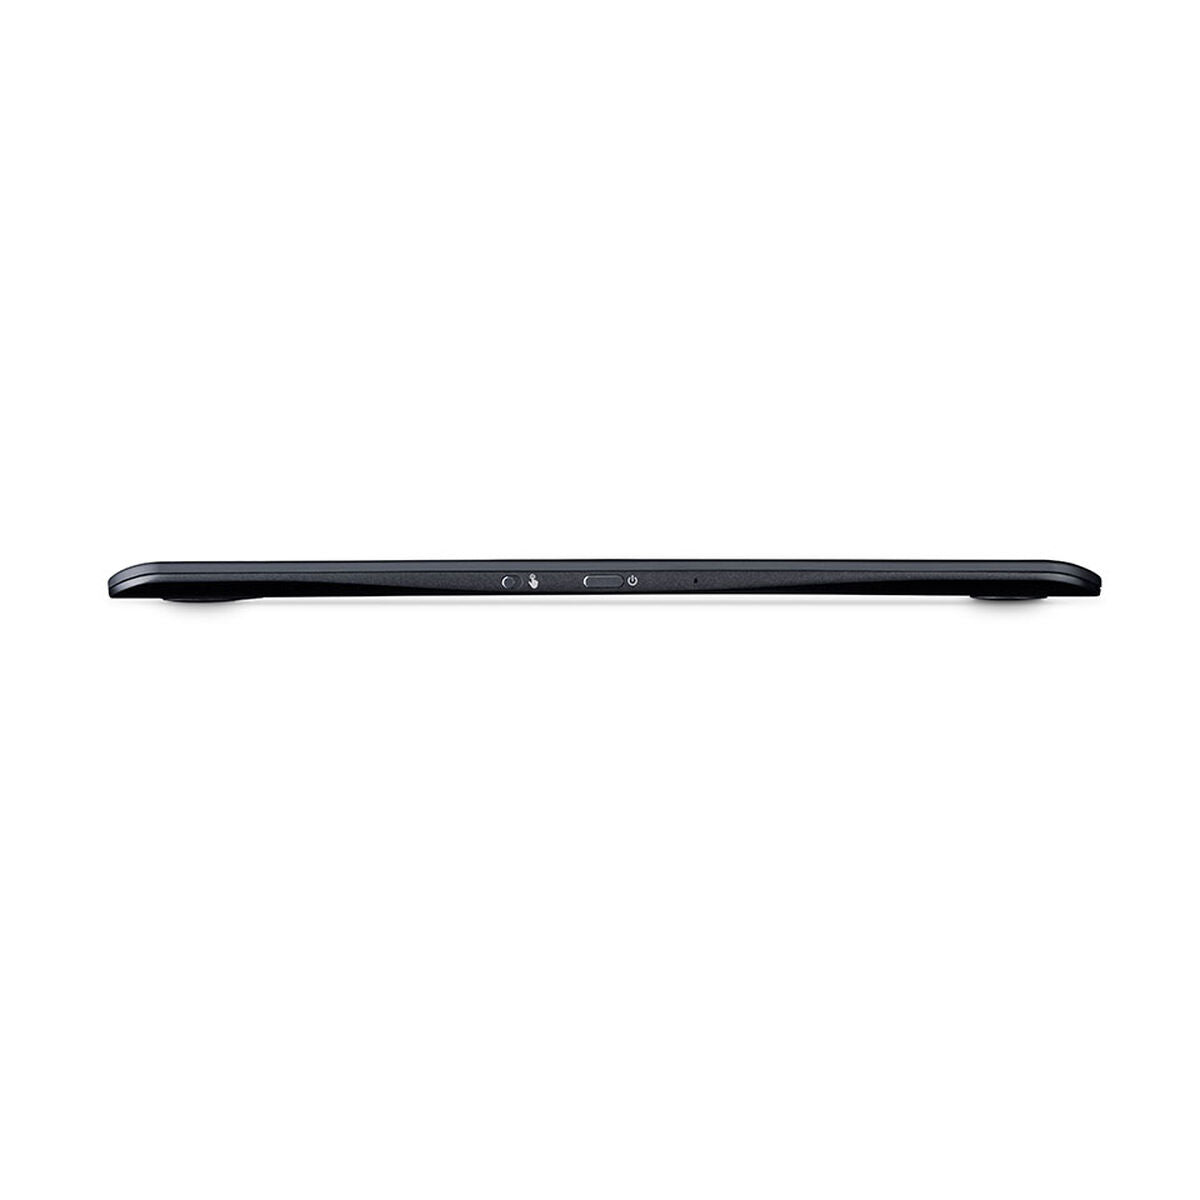 Graphics tablets and pens Wacom PTH-660-S, Wacom, Computing, Accessories, graphics-tablets-and-pens-wacom-pth-660-s, Brand_Wacom, category-reference-2609, category-reference-2803, category-reference-2812, category-reference-t-19685, category-reference-t-19908, category-reference-t-21353, computers / components, Condition_NEW, Price_400 - 500, Teleworking, RiotNook